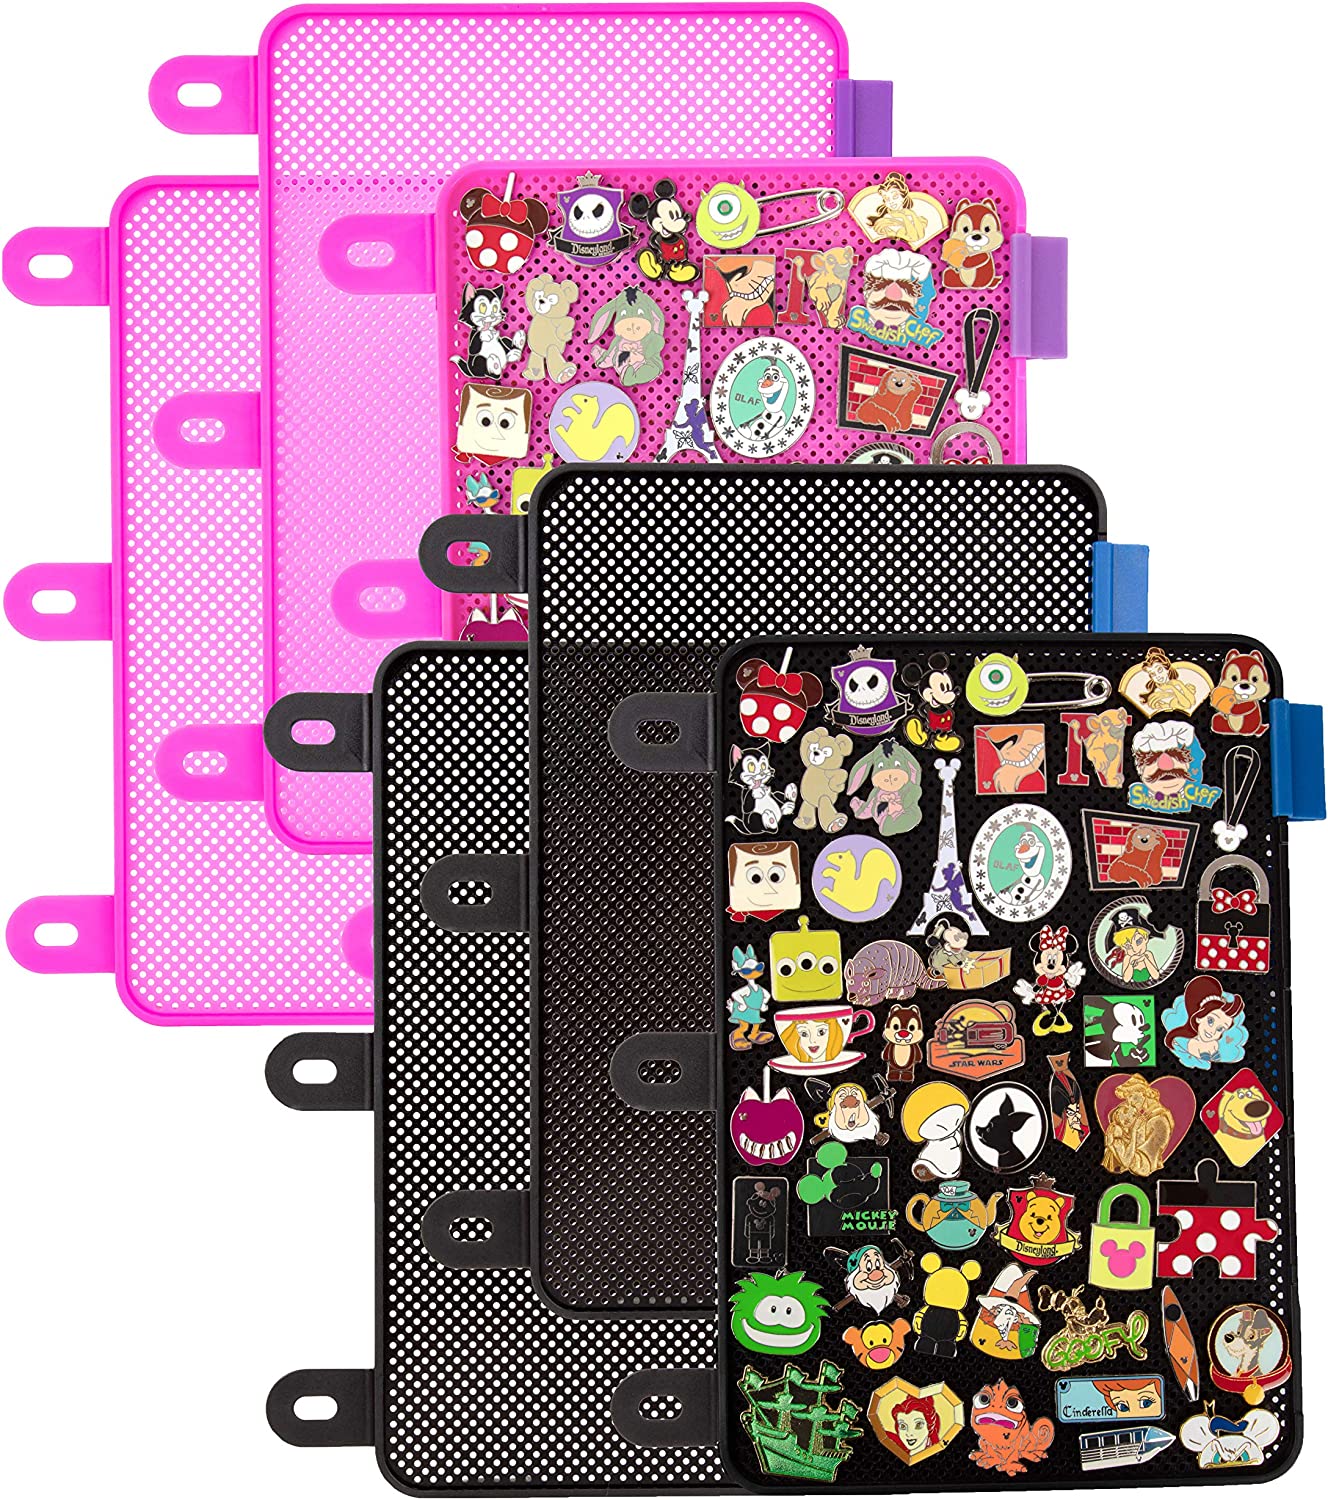 Enamel Pin Display Pages (6 PK) - Display and Trade Your Disney Collectible  Pins in Any 3-Ring Binder - Pages Lay Flat with Pinbacks and NO Sagging!  (Black/Pink - Pins Not Included) 